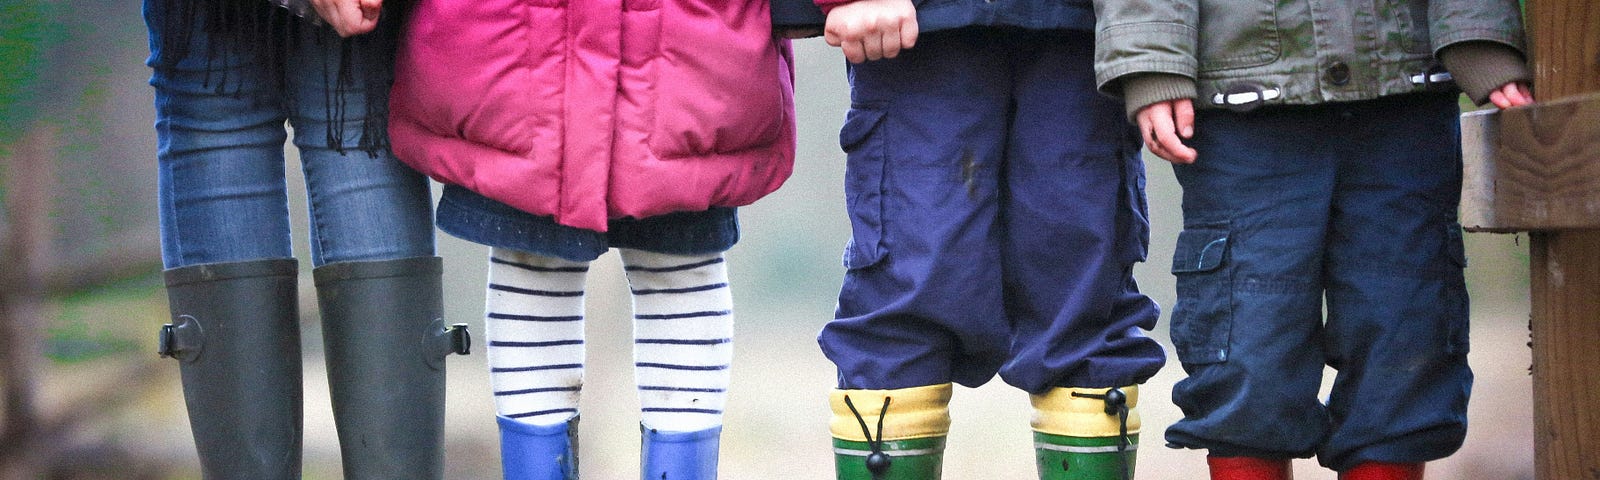 Four children with rain jackets and rubber boots.